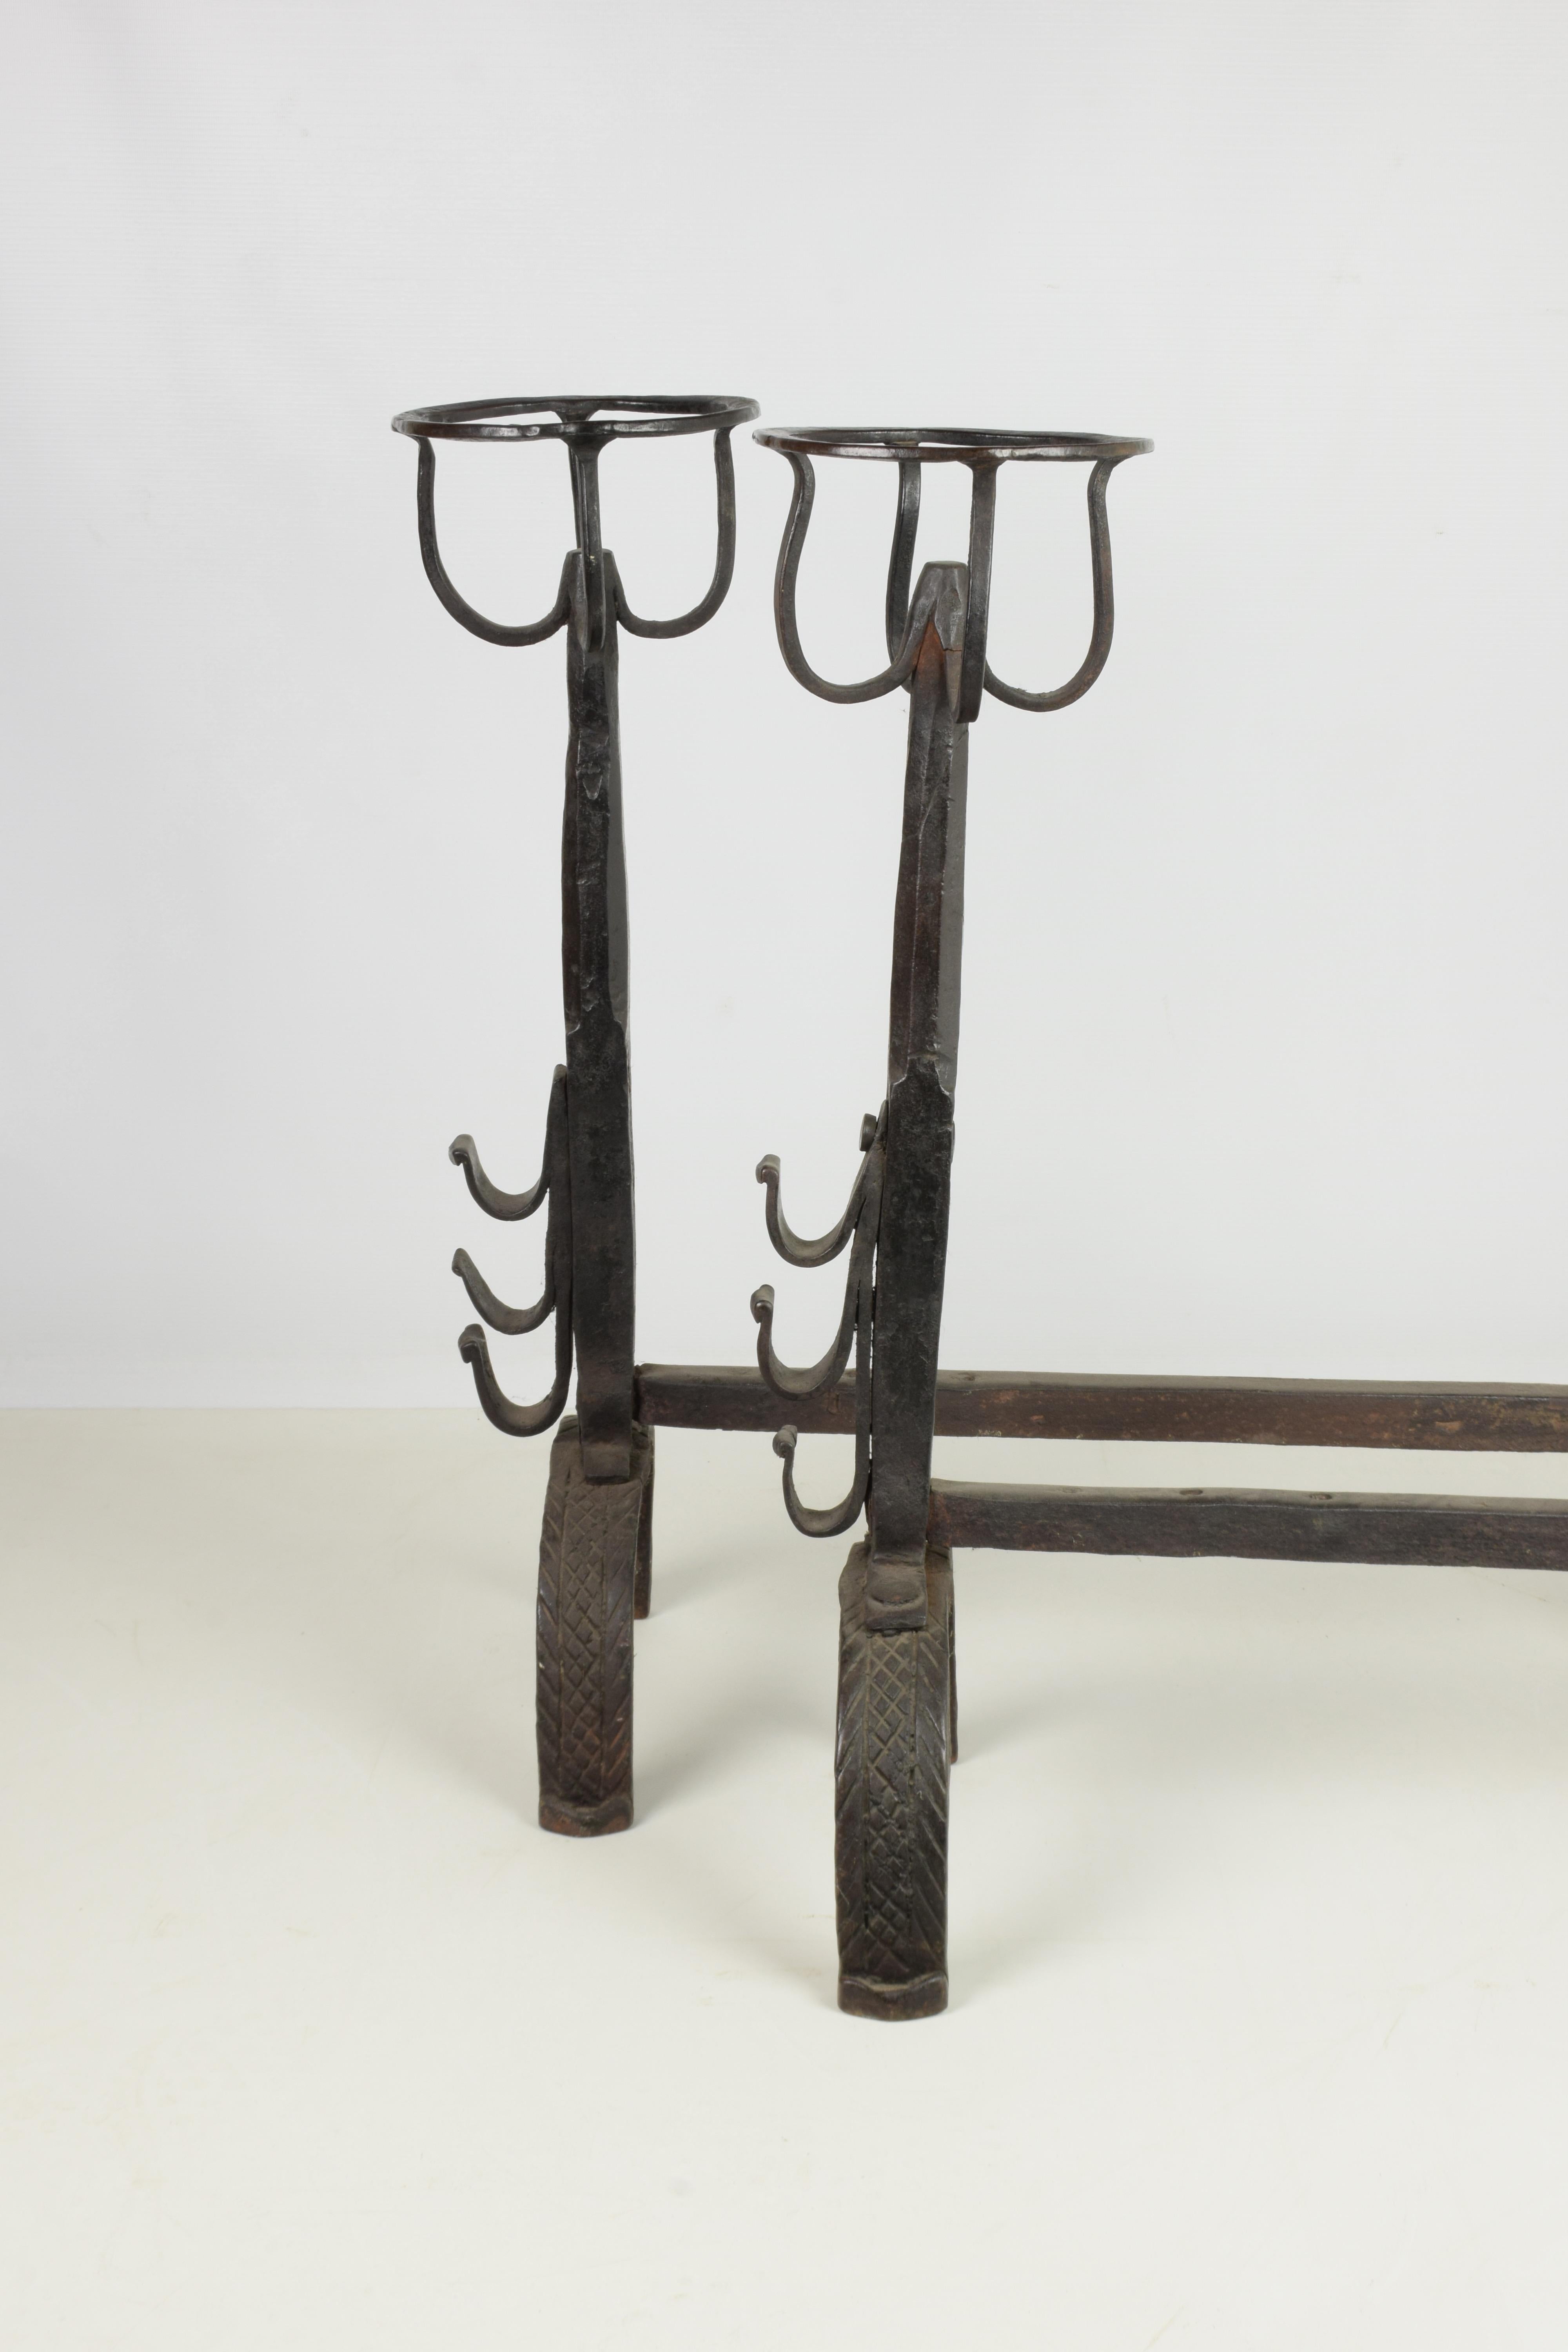 Pair of Italian Wrought Iron Andirons with Food Warmer Late 16th Century Black For Sale 1